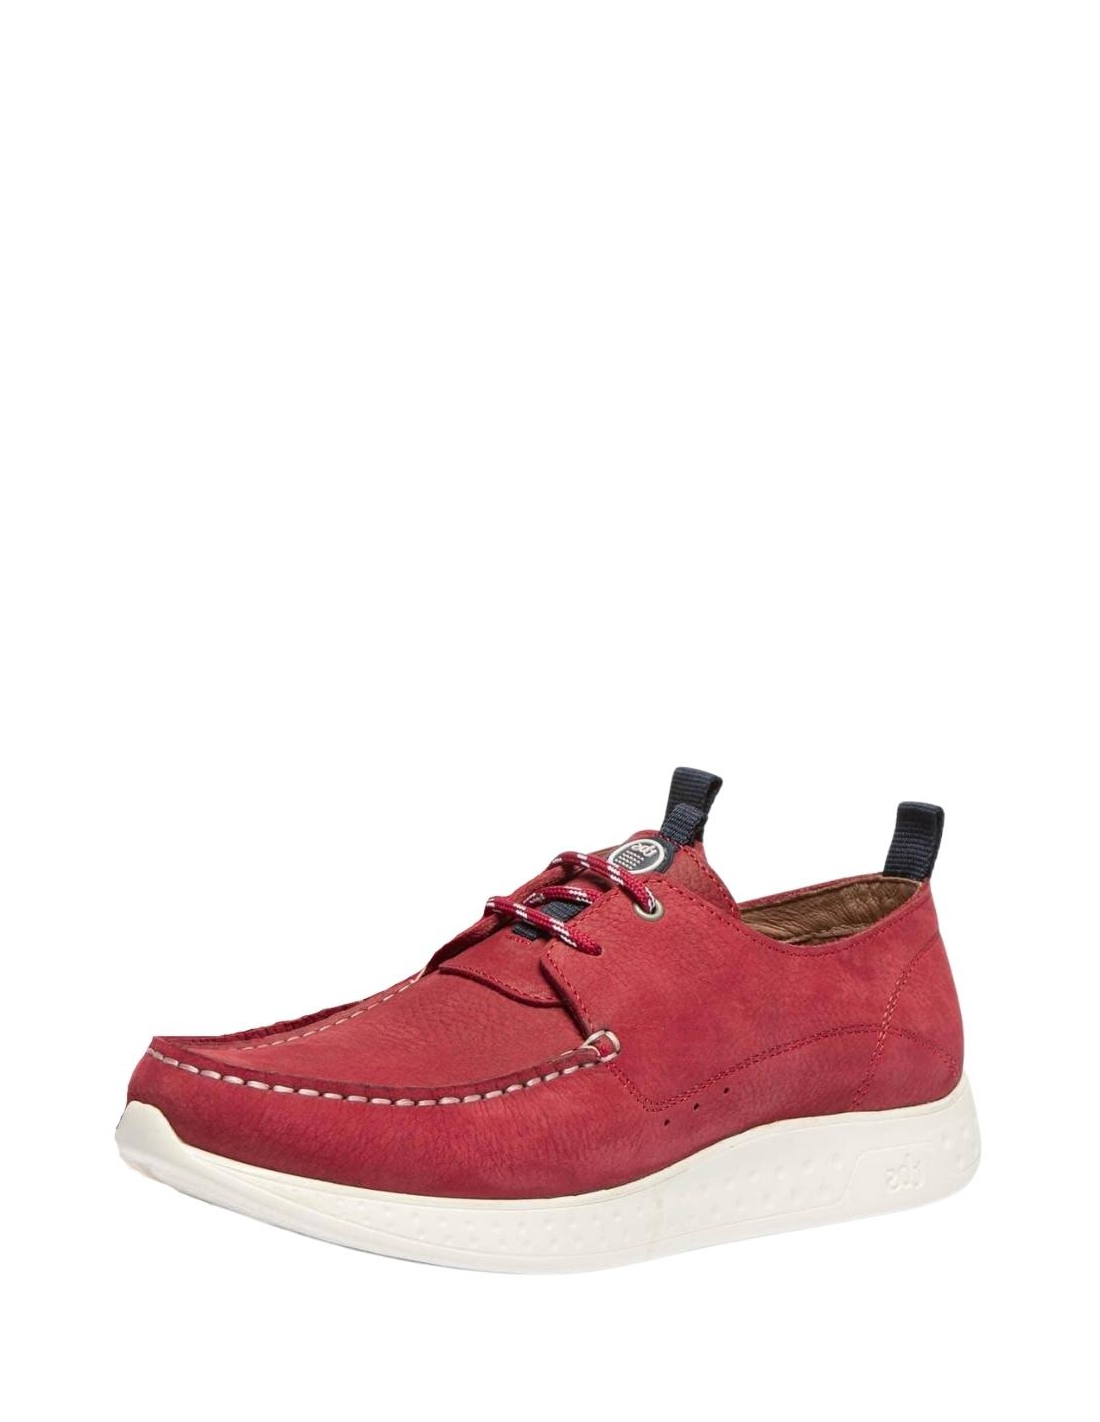 Chaussures Homme - tbs